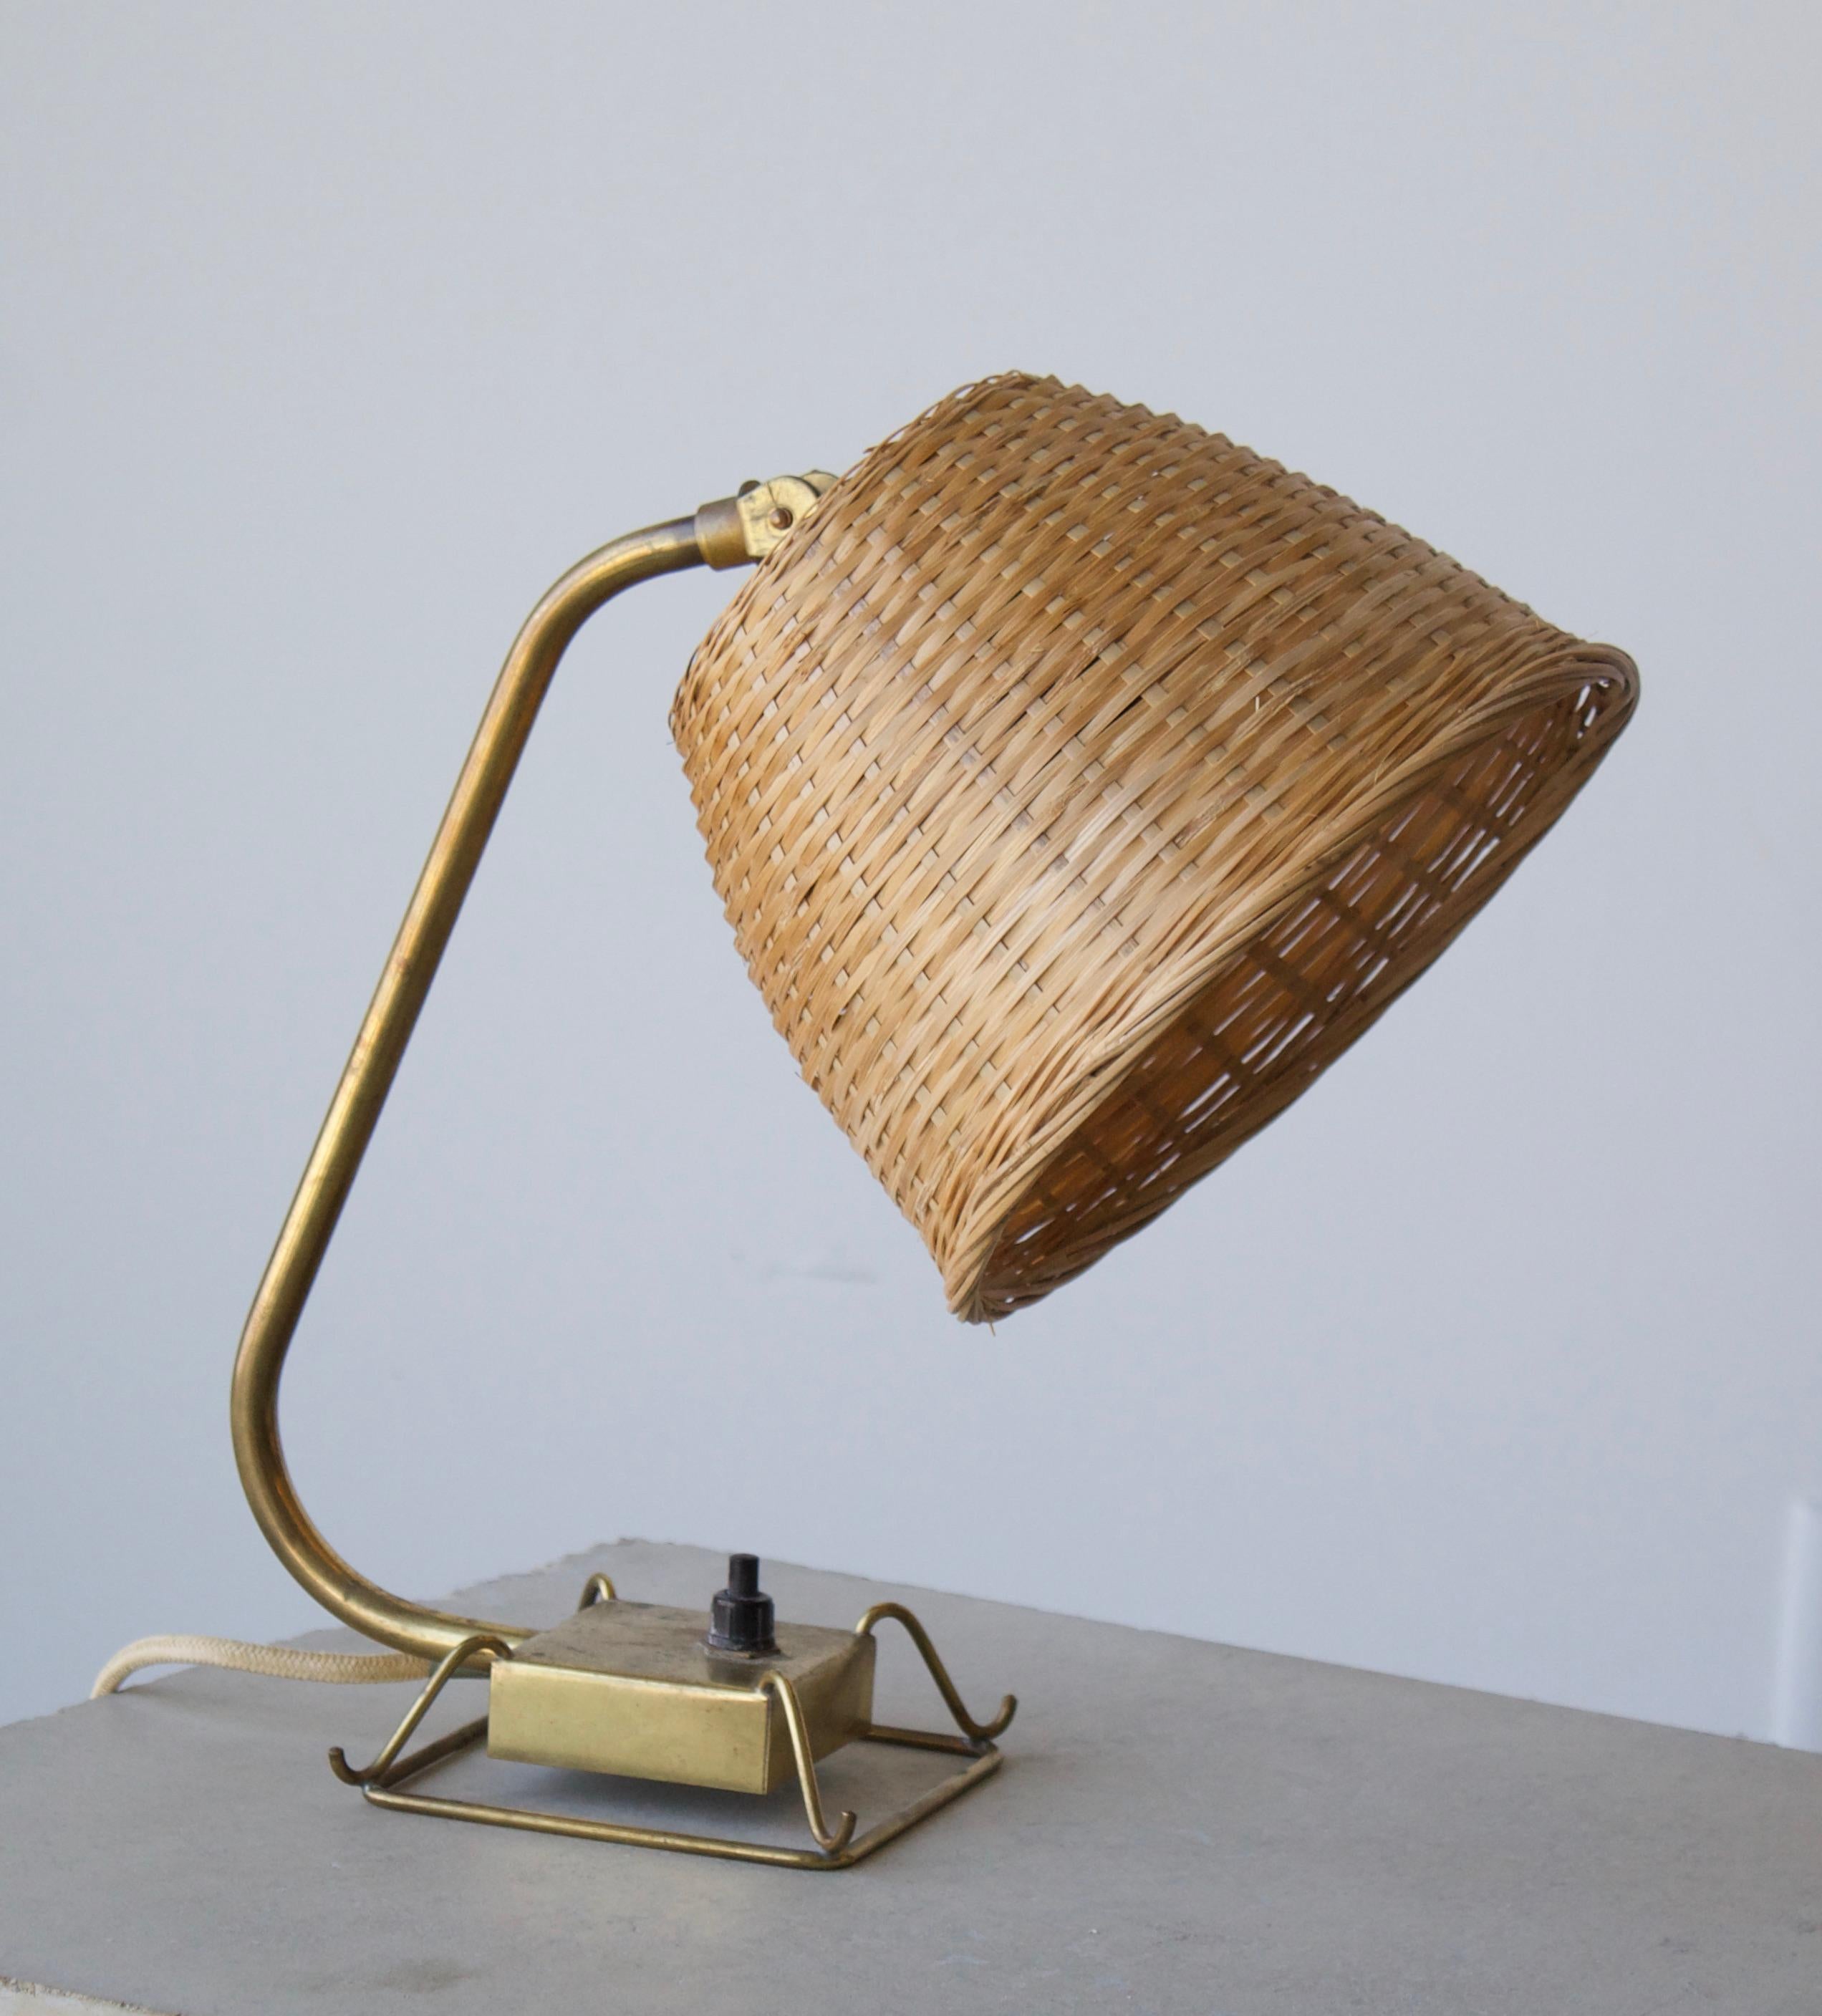 An adjustable modernist table lamp that also functions as a wall light. Designed and produced by Idman, 1950s, Finland. Assorted vintage rattan lampshade.

Other designers of the period include Paavo Tynell, Carl Axel Acking, Hans Bergström, Alvar